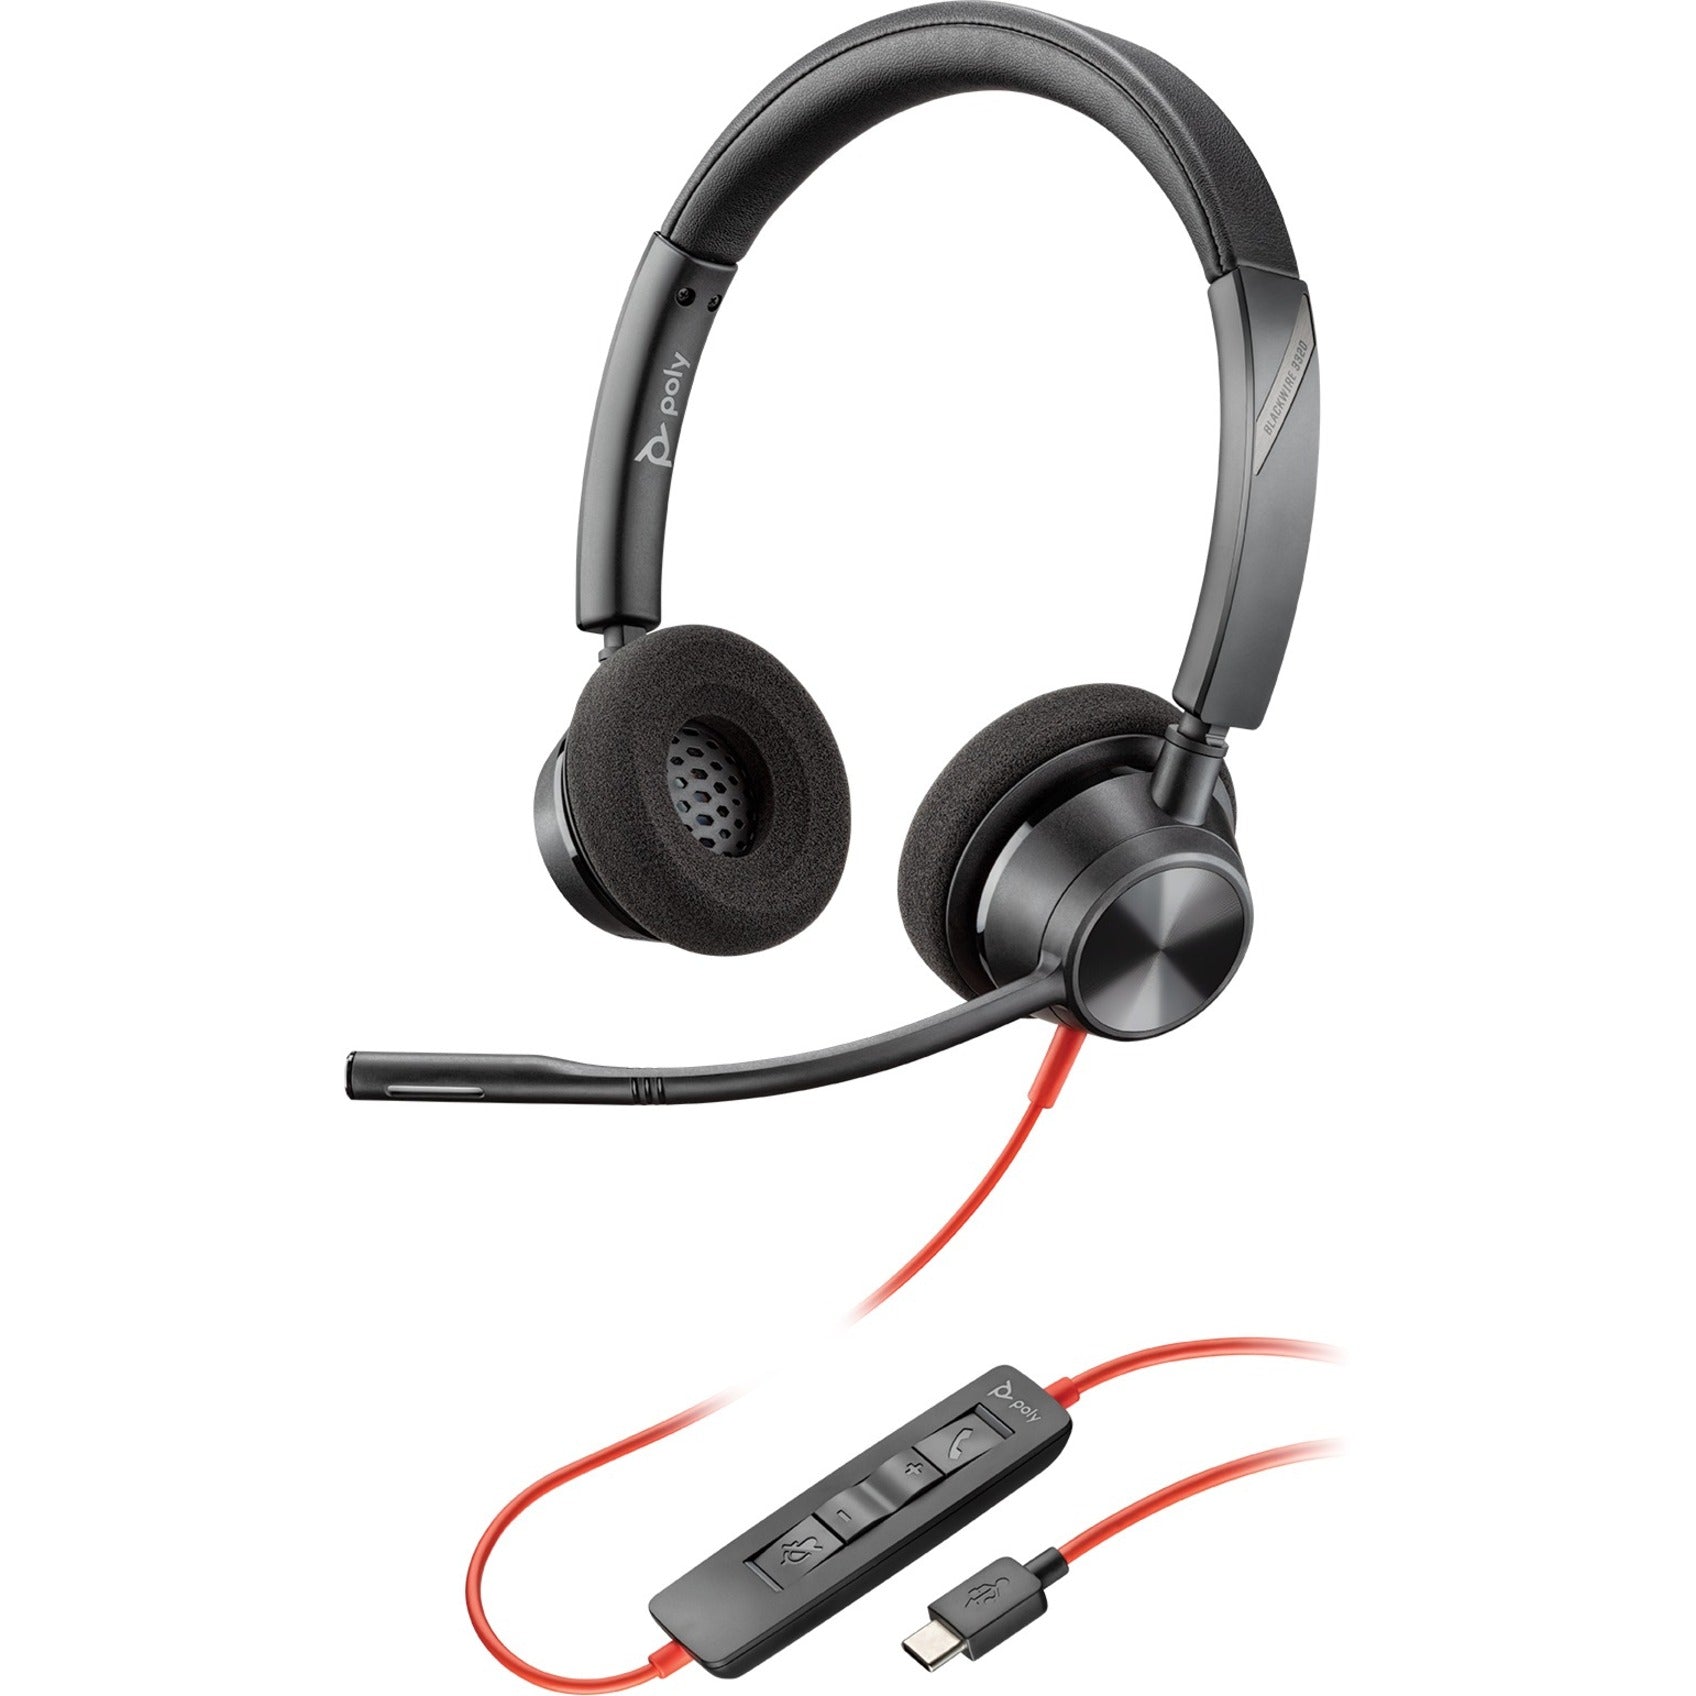 Plantronics 213935-101 Blackwire 3320 USB-C Headset, Binaural Over-the-head Stereo Headset with Noise Cancelling Microphone